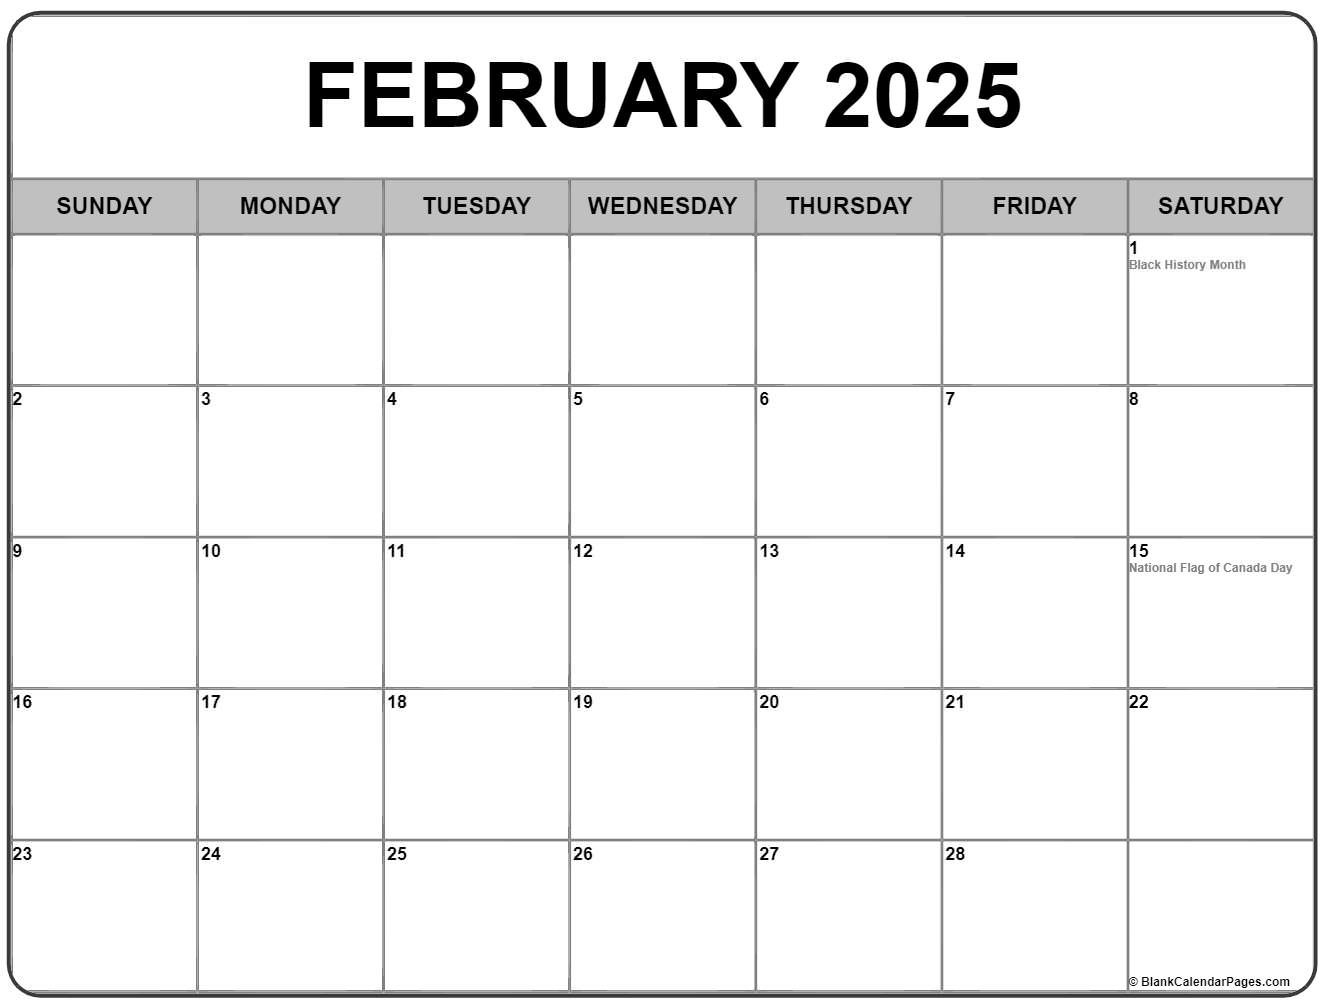 philippines-february-2025-calendar-with-holidays-bank2home